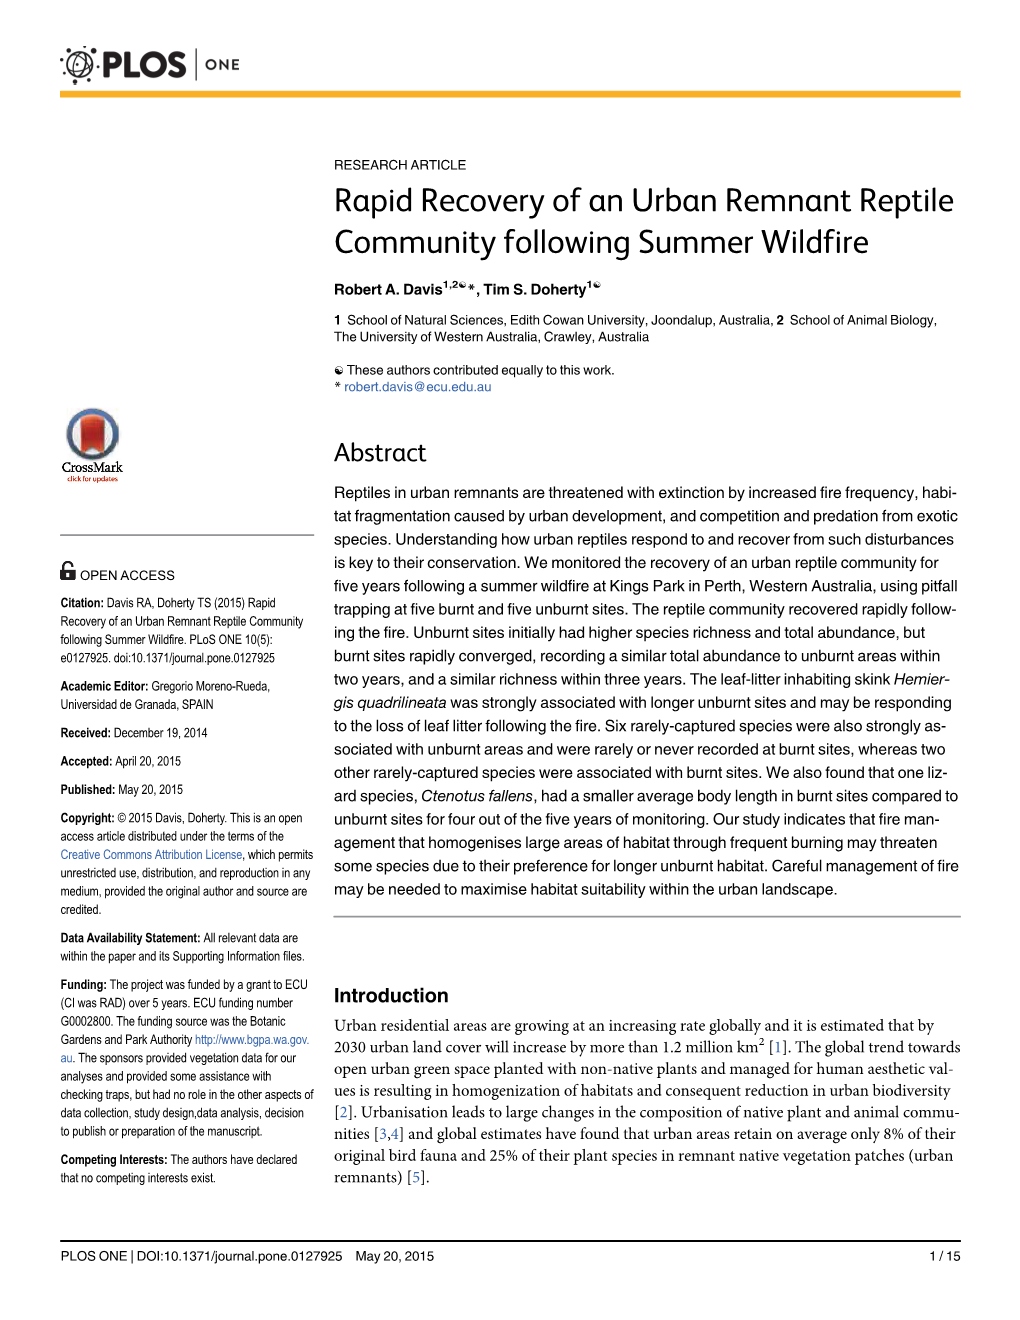 Rapid Recovery of an Urban Remnant Reptile Community Following Summer Wildfire